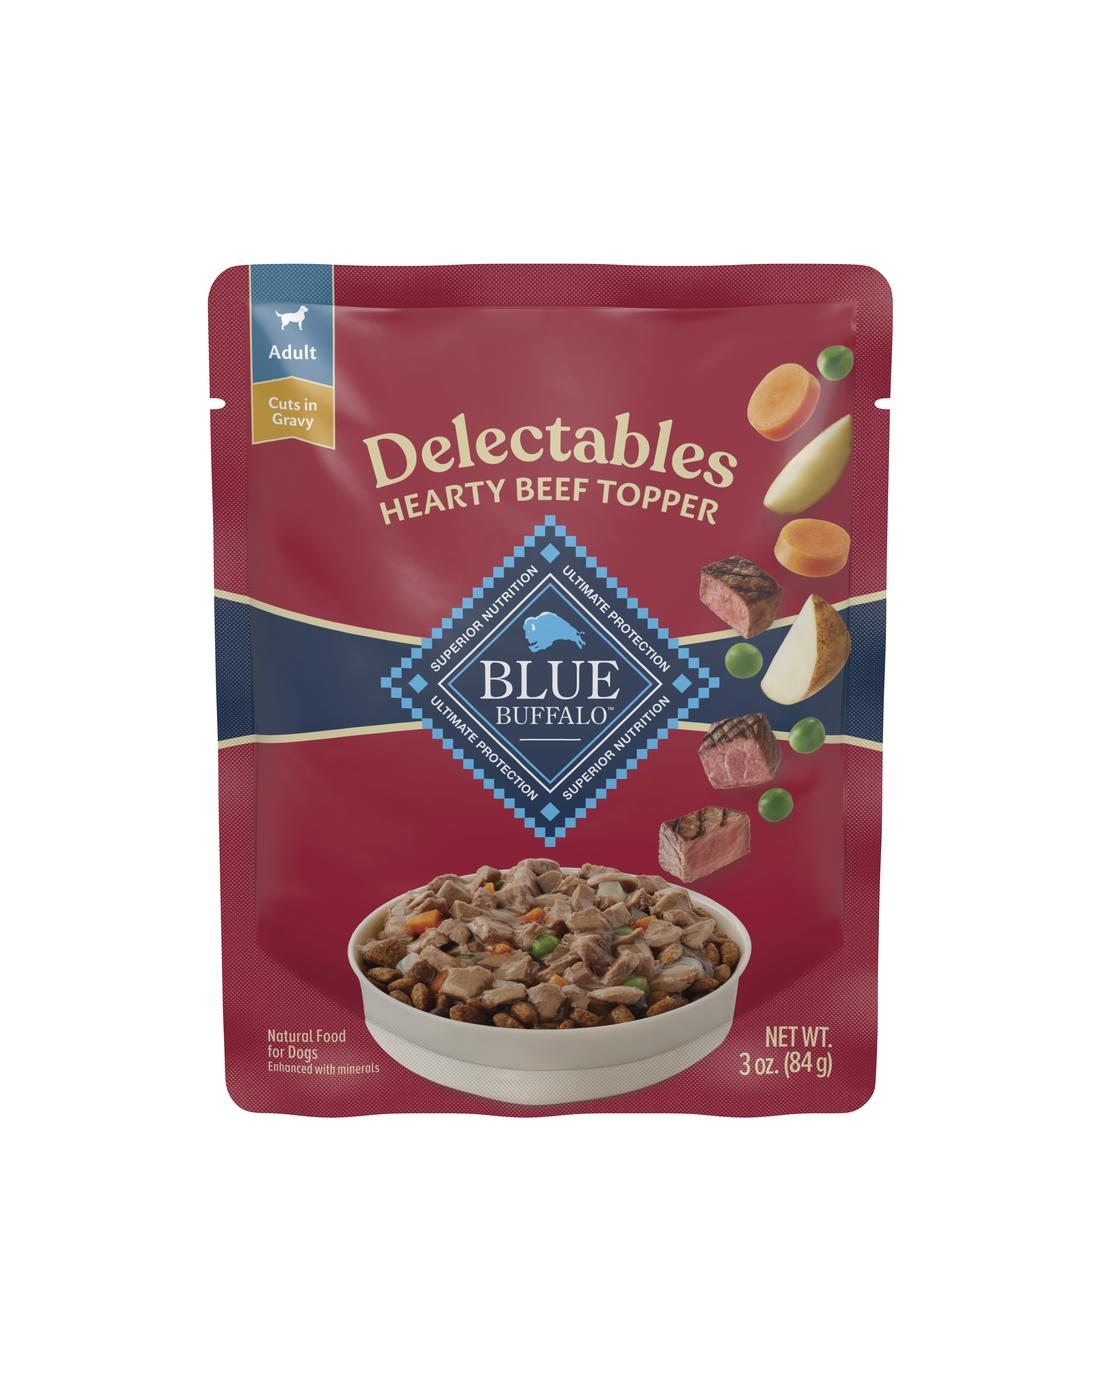 Blue Buffalo Delectables Beef Topper Wet Dog Food; image 1 of 2